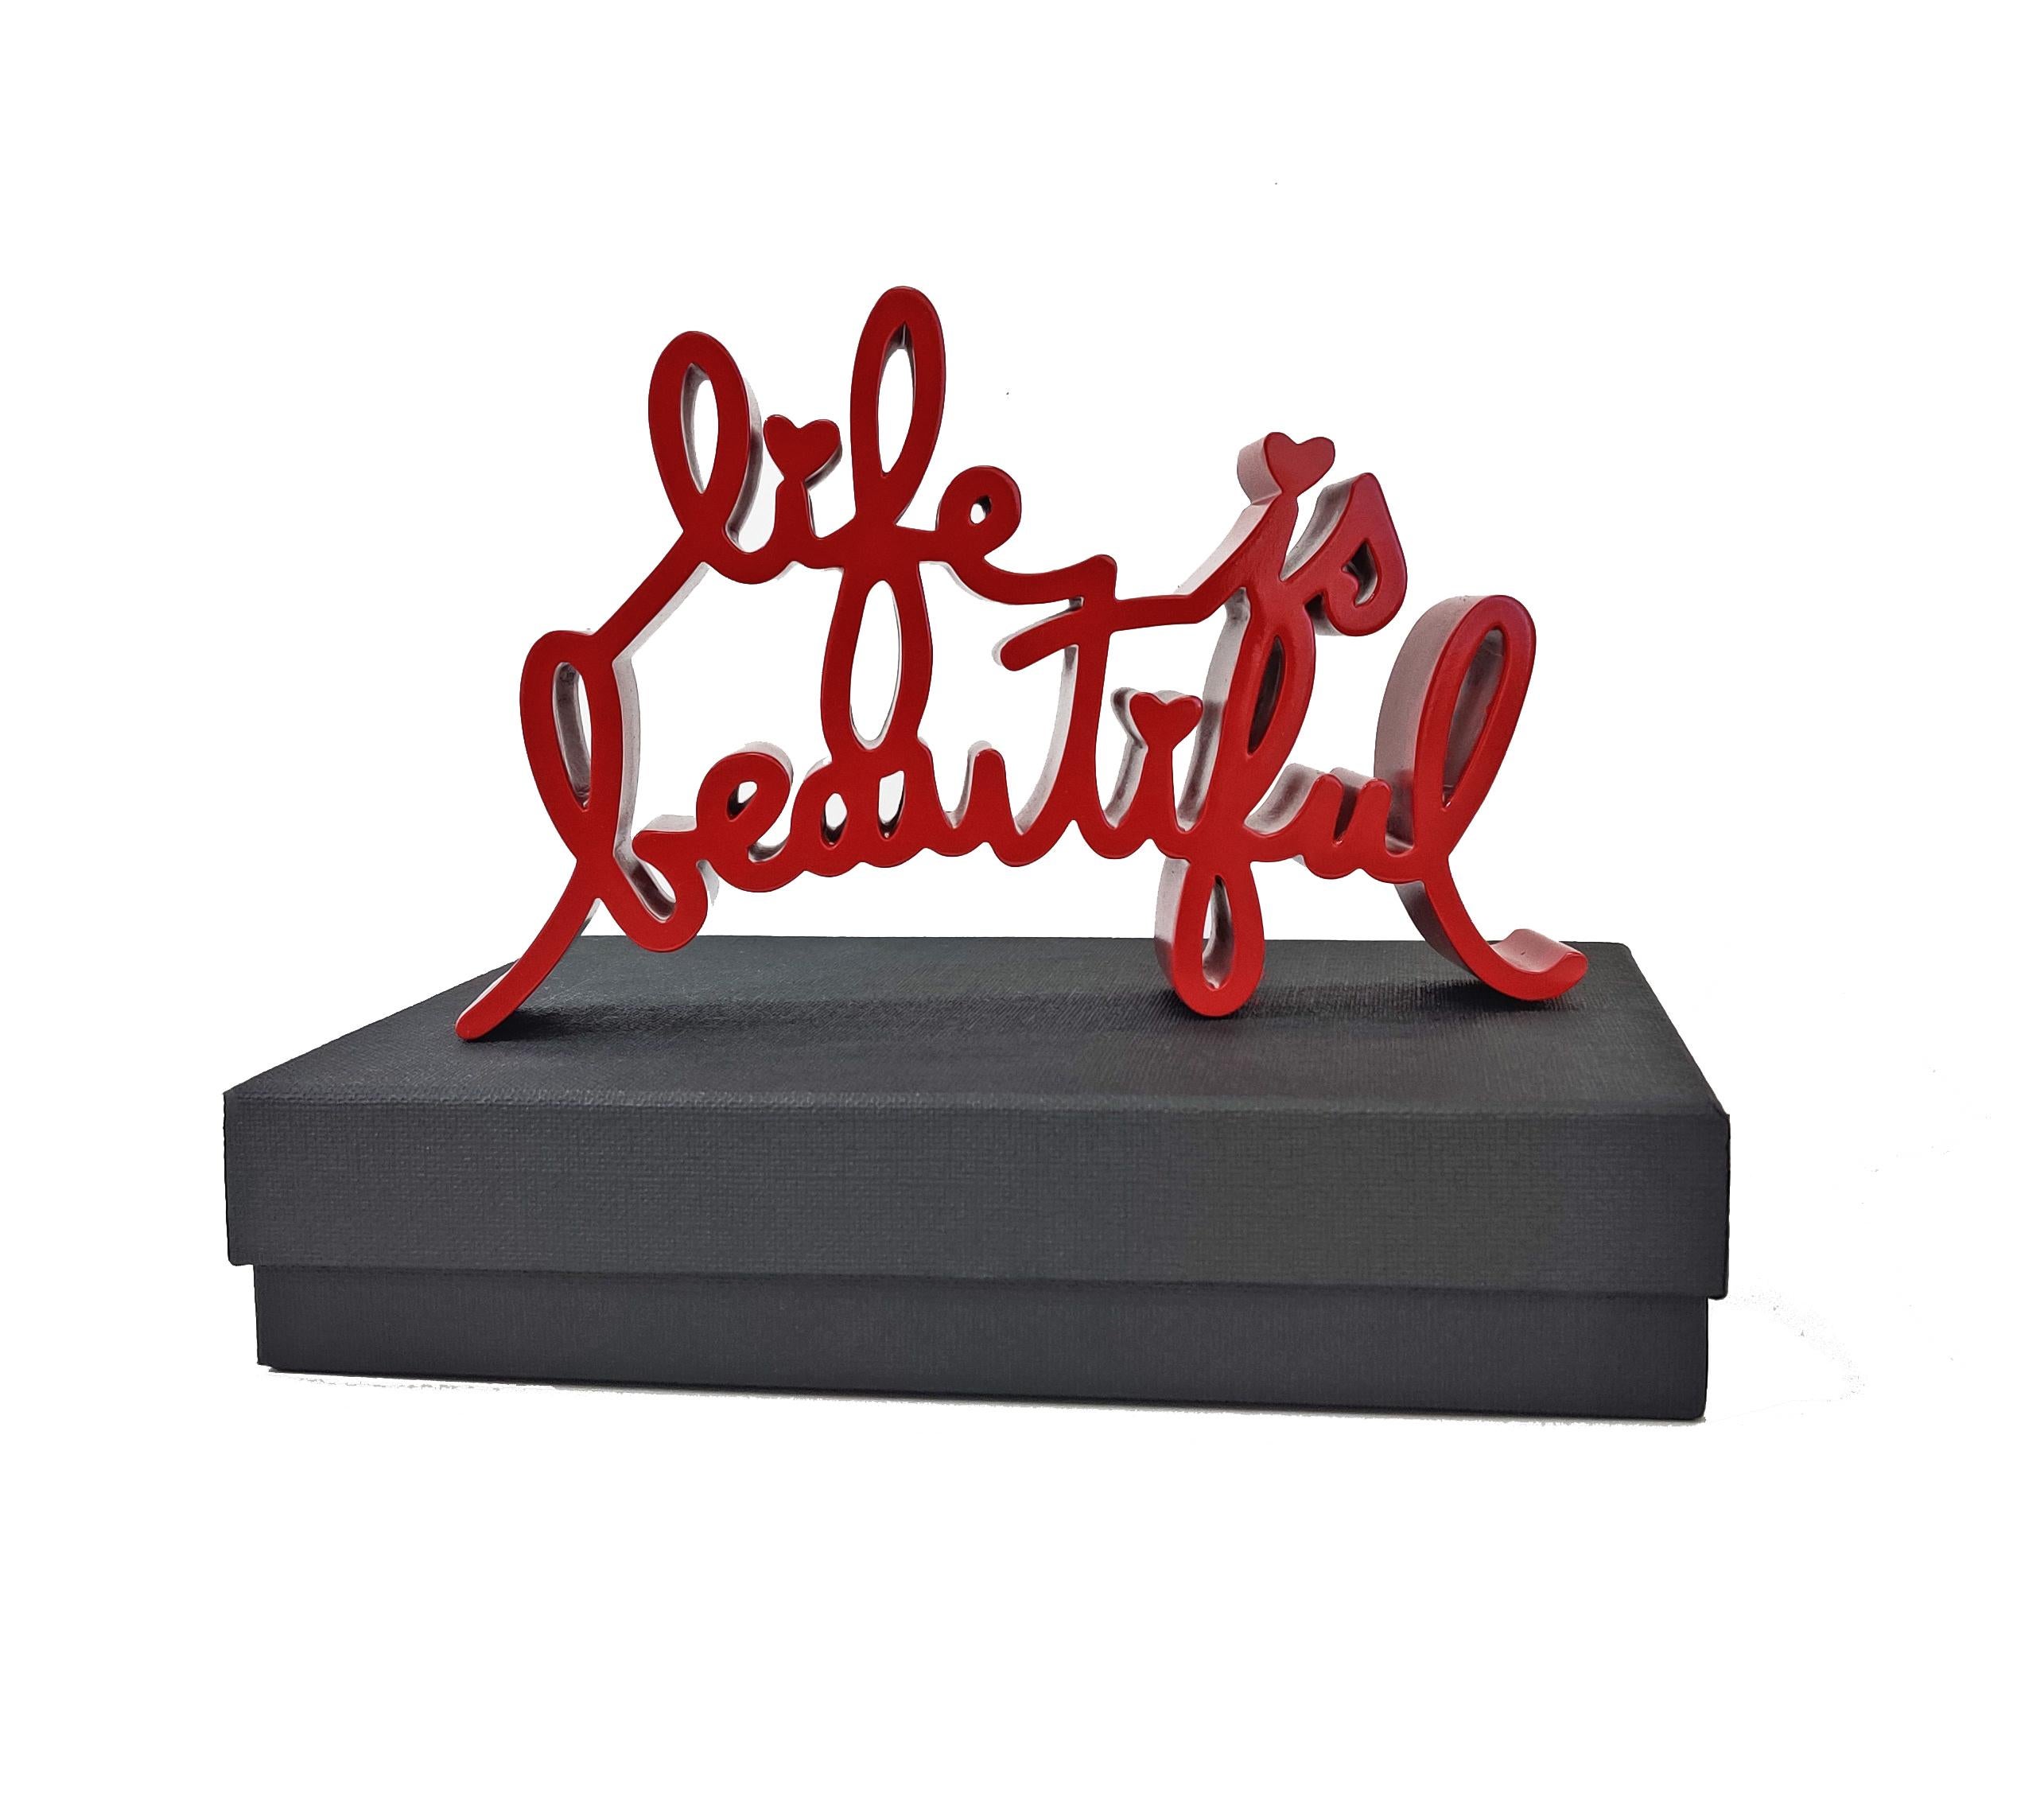 Mr Brainwash Abstract Sculpture - LIFE IS BEAUTIFUL (RED SCULPTURE)